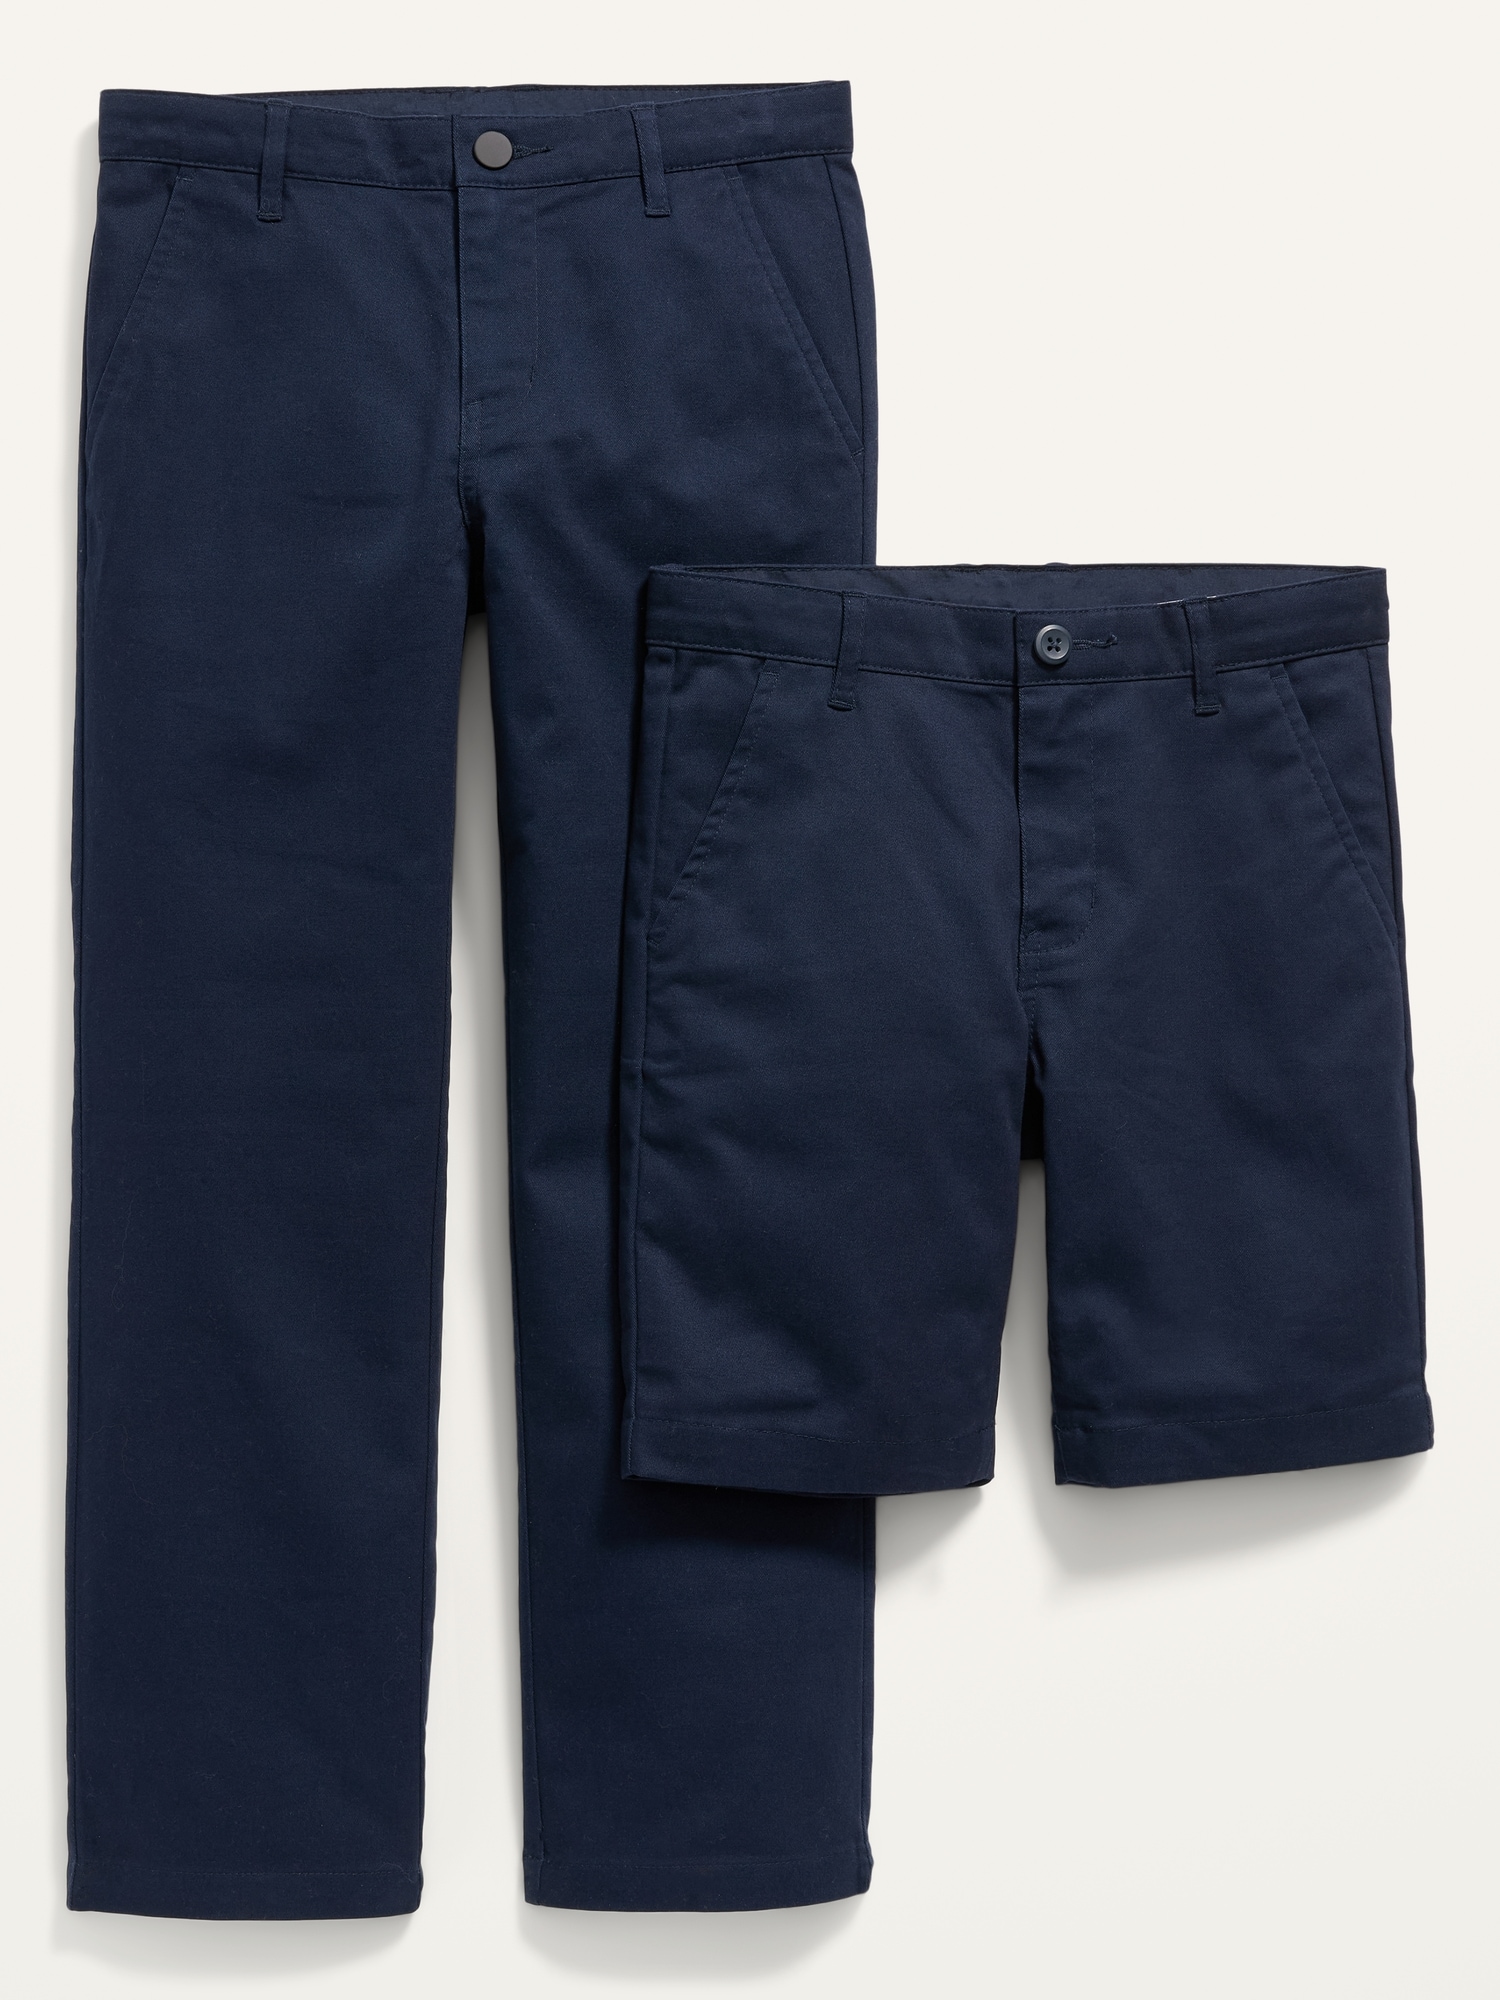 Old Navy Straight Uniform Pants & Shorts Knee Length 2-Pack for Boys blue. 1